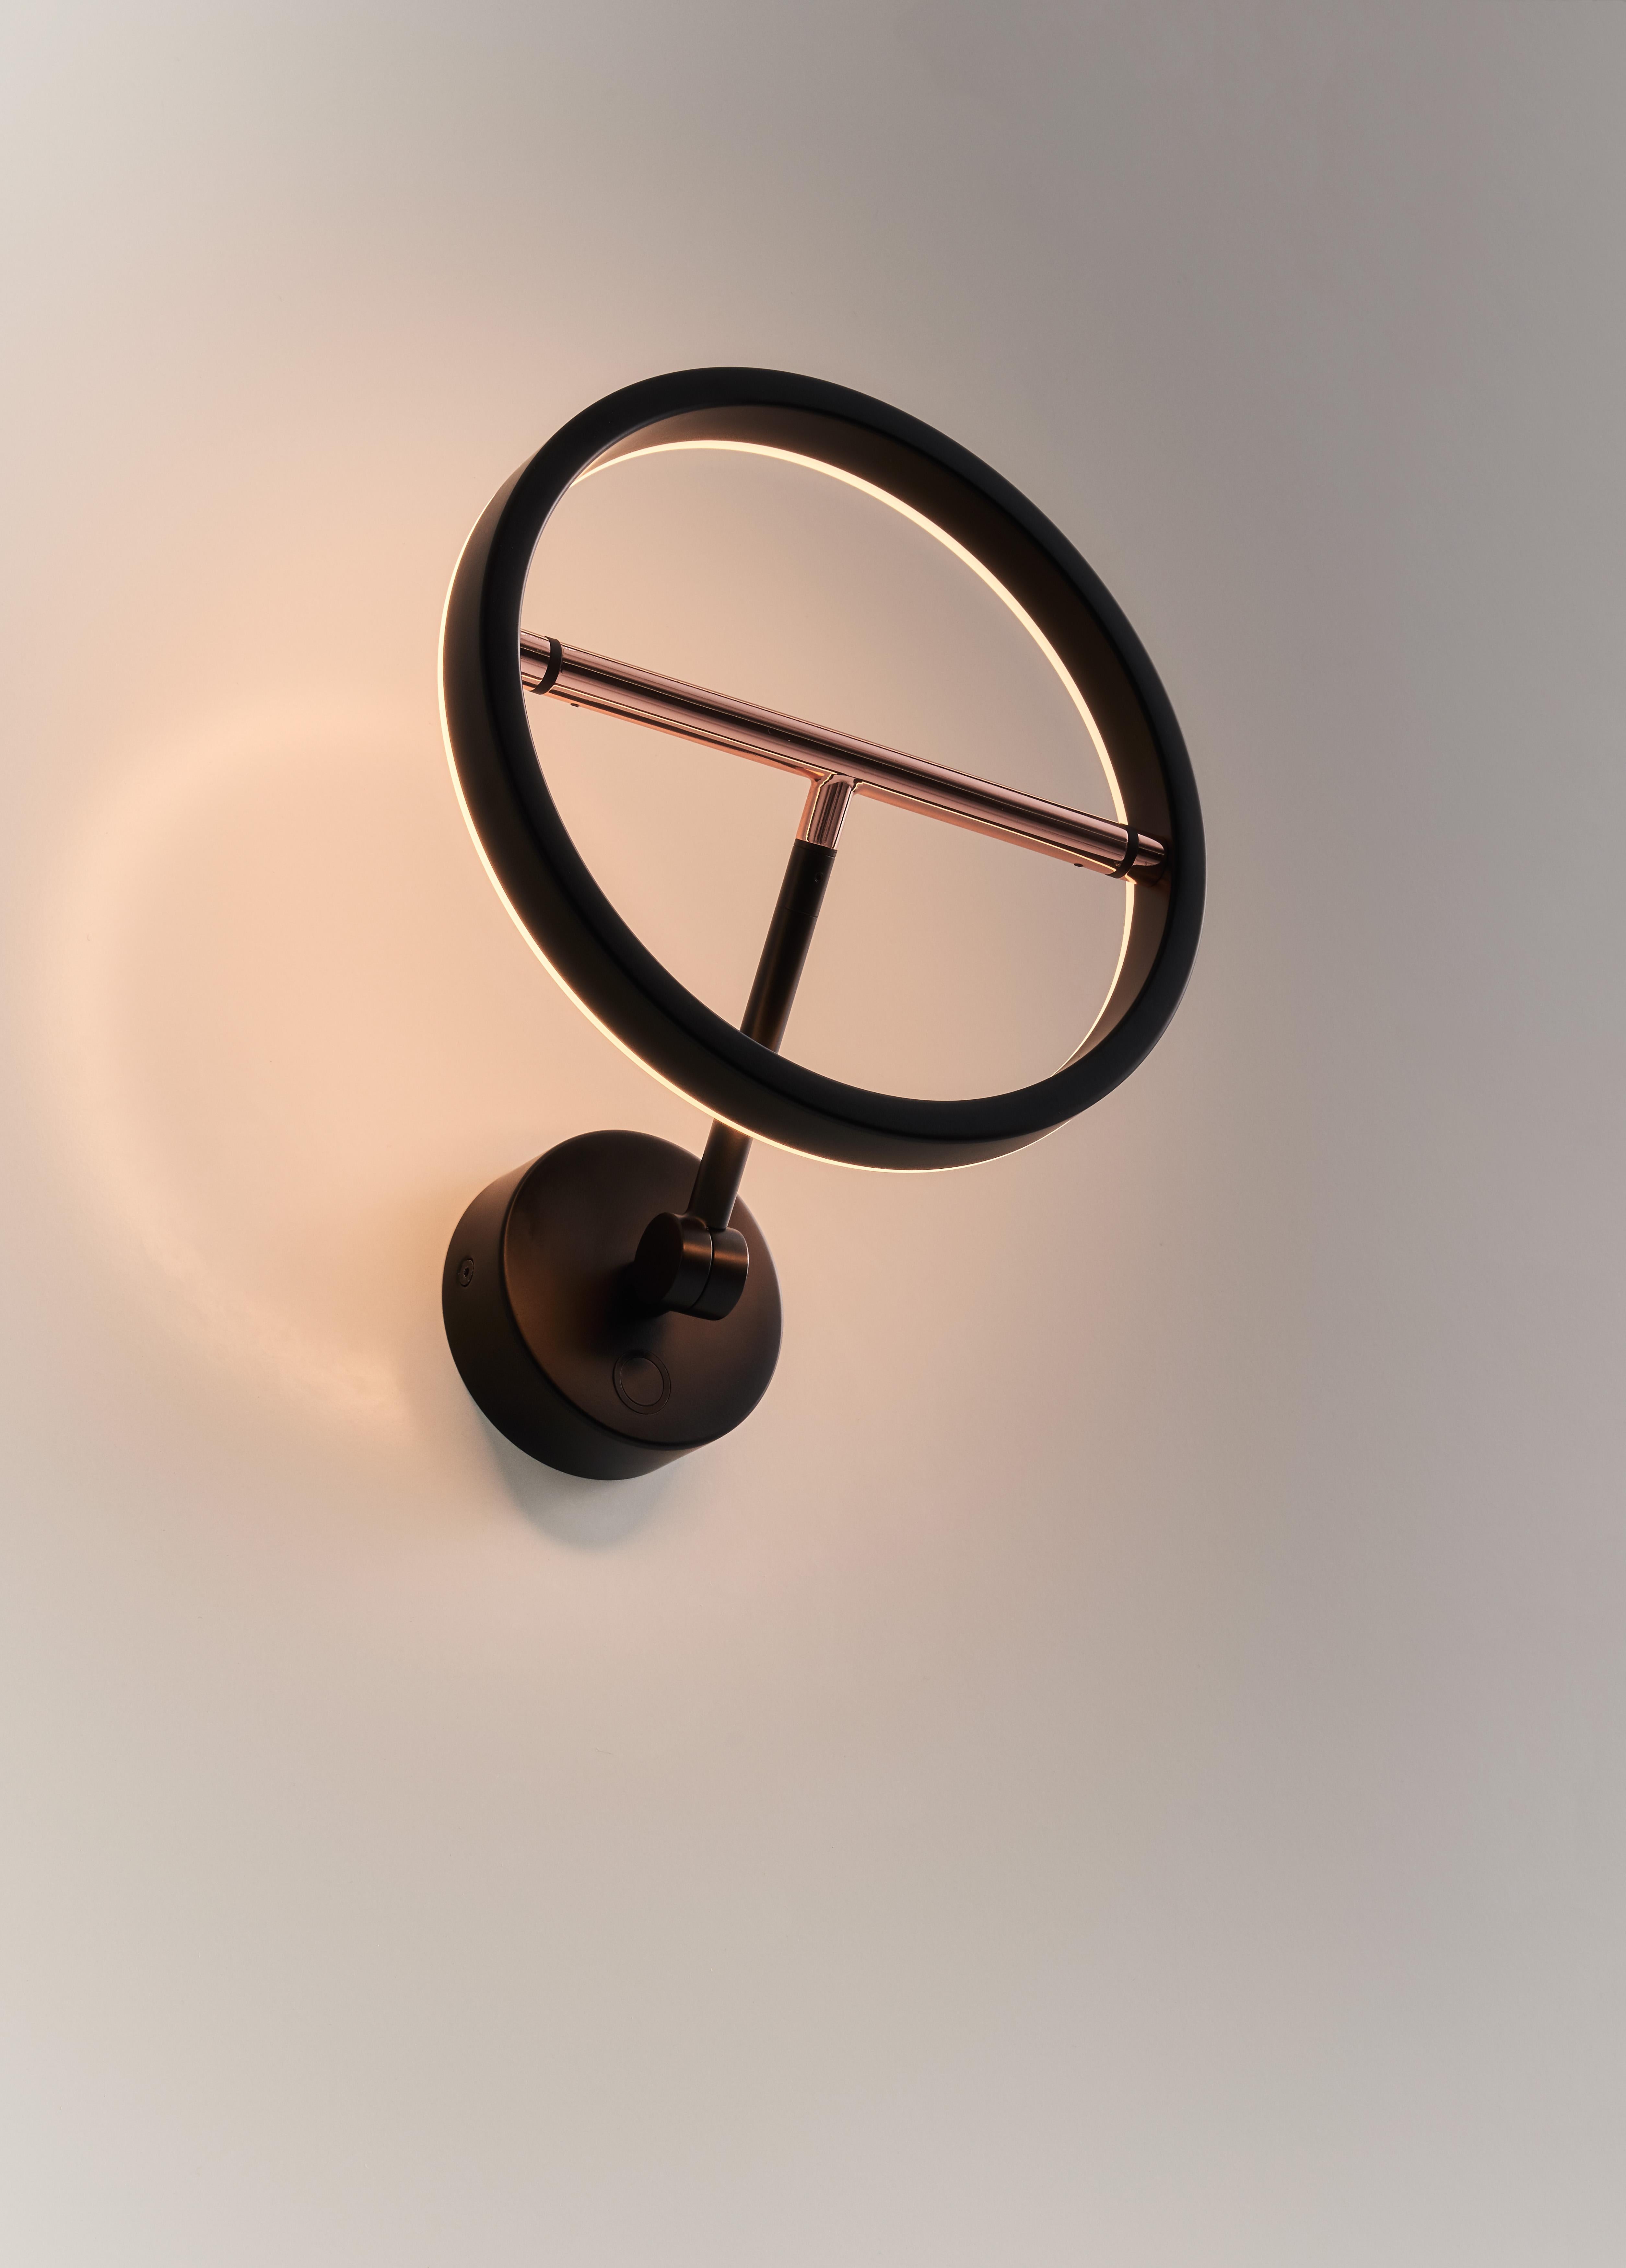 SOL collection is low-key design with elaborate consideration, consists of pendant, table lamp and even floor lamp type. SOL Wall Sconce’s ring-like lampshade is finely affixed to a metallic luster balance bar, demonstrating the definition of